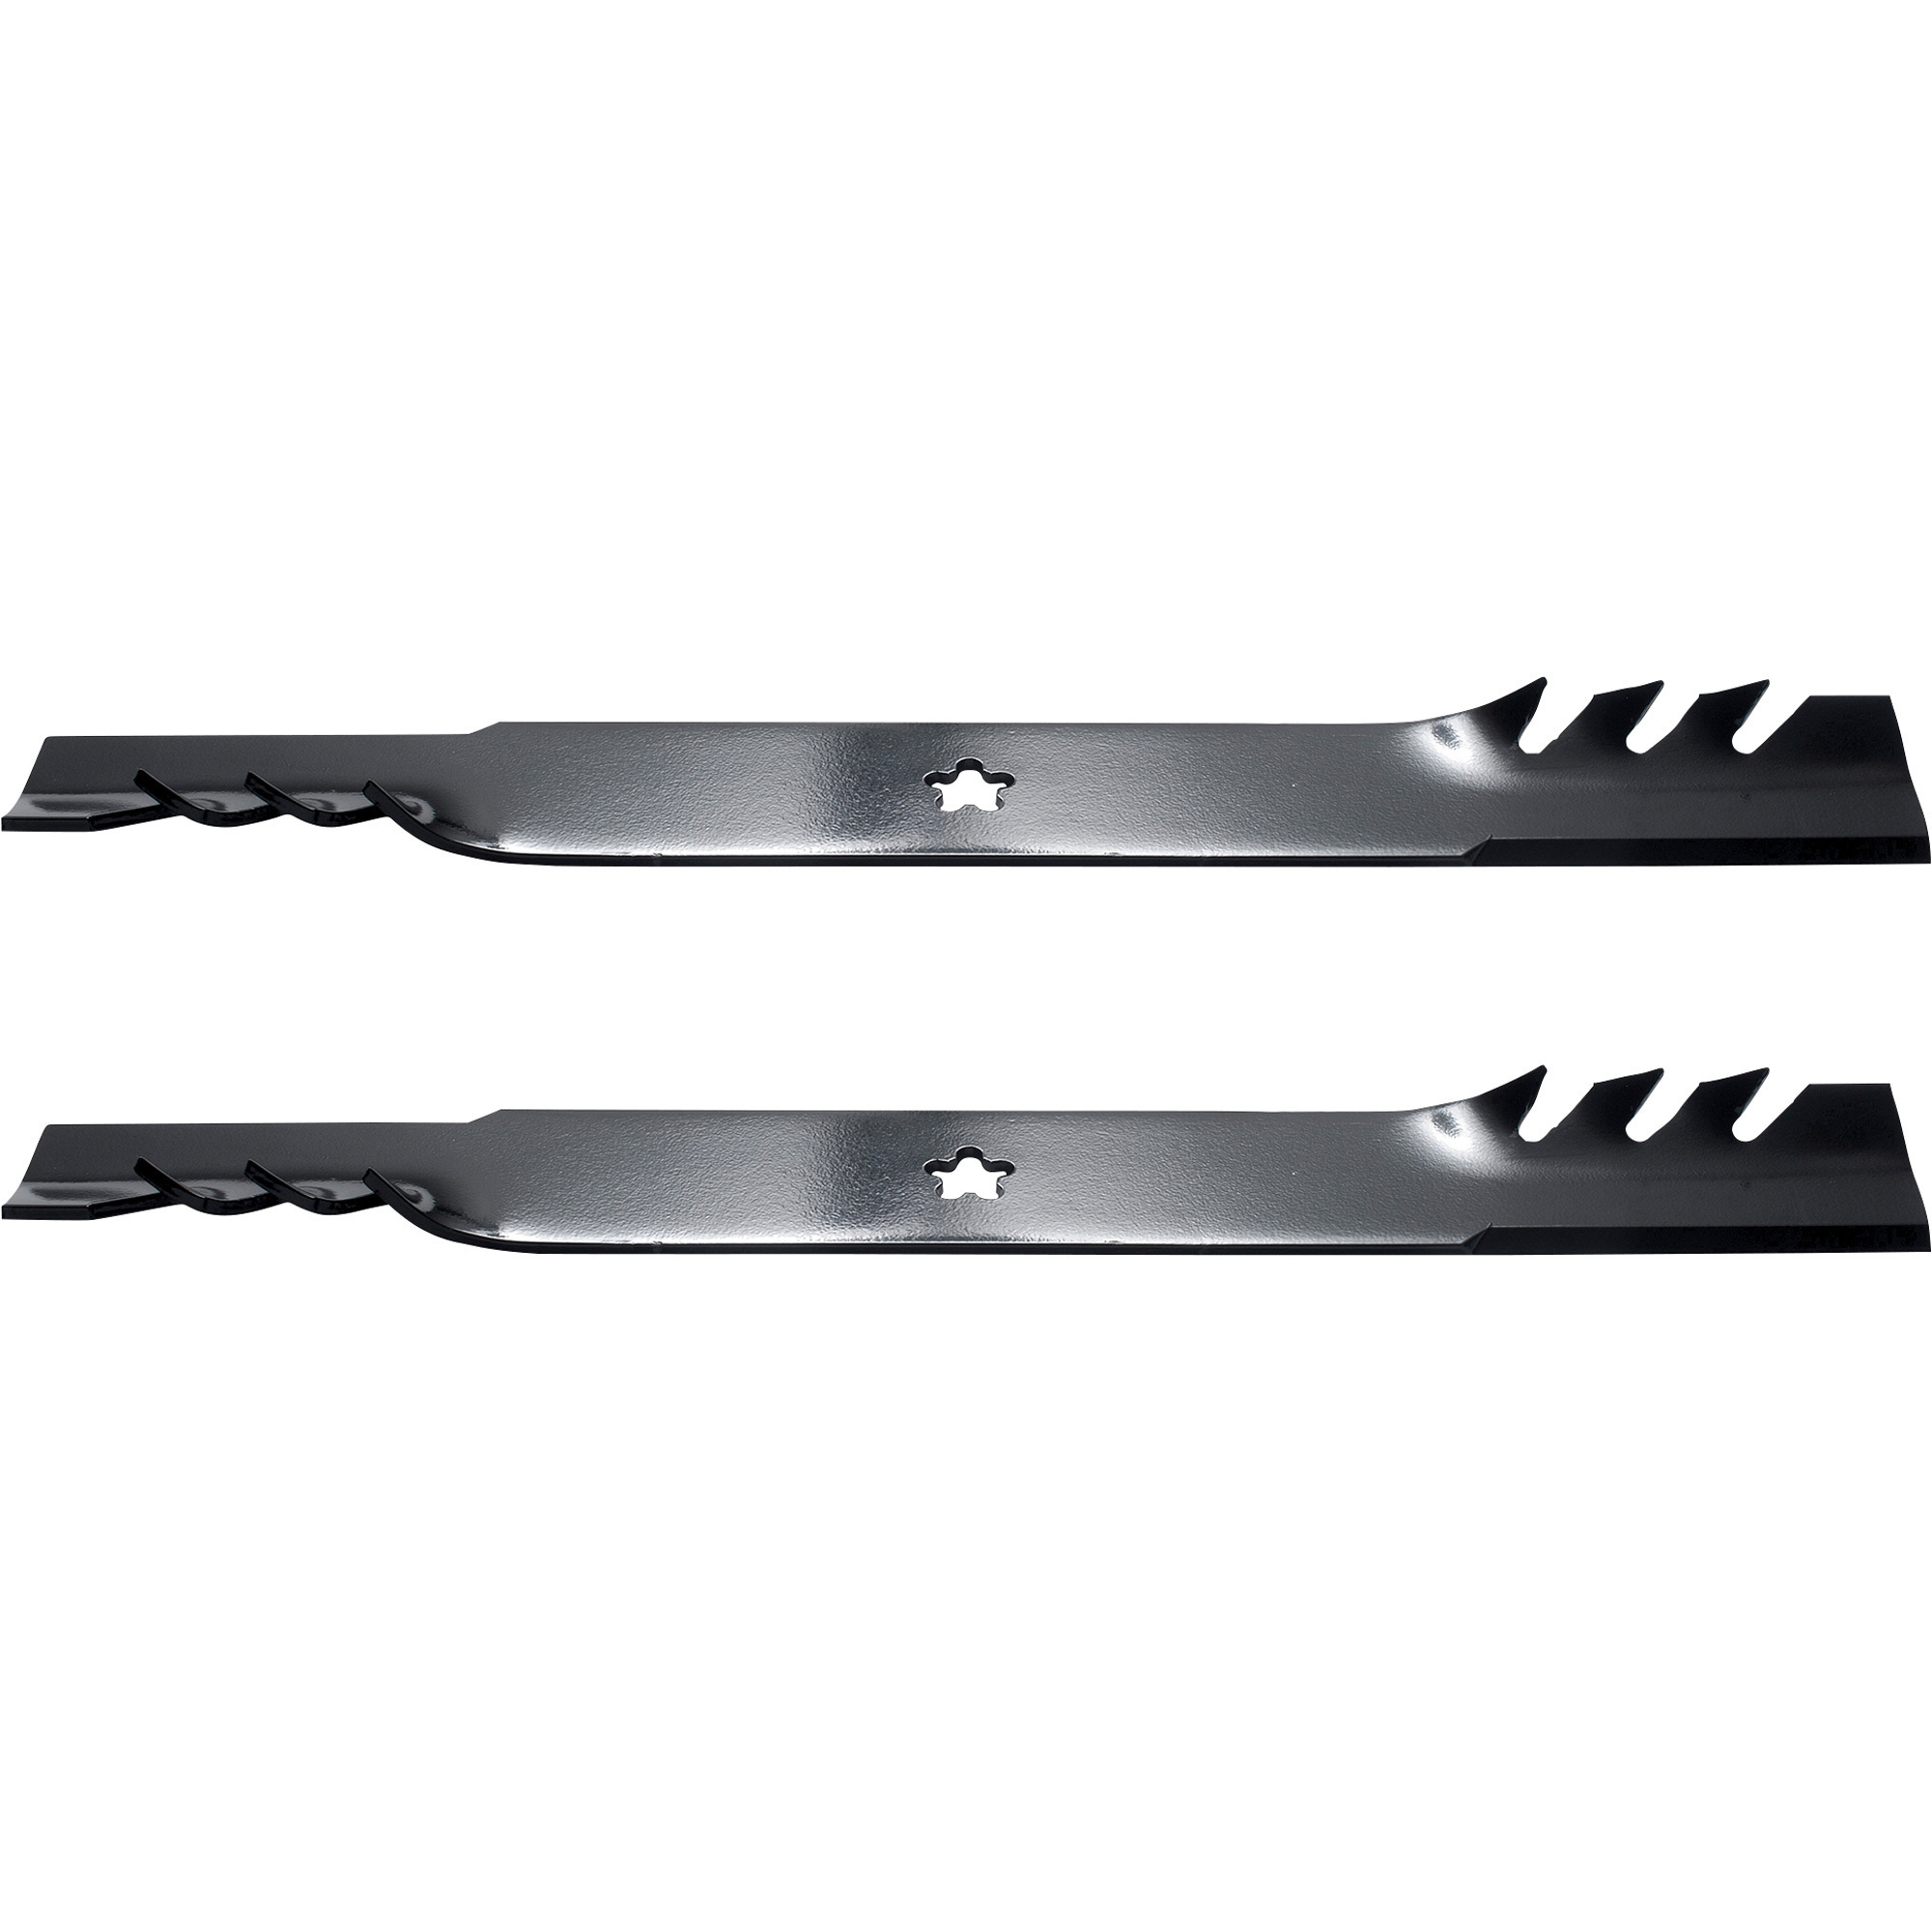 Oregon Gator G3 Replacement Lawn Mower Blades, 2-Piece Set, Fits 42Inch Mowers, Model 528966